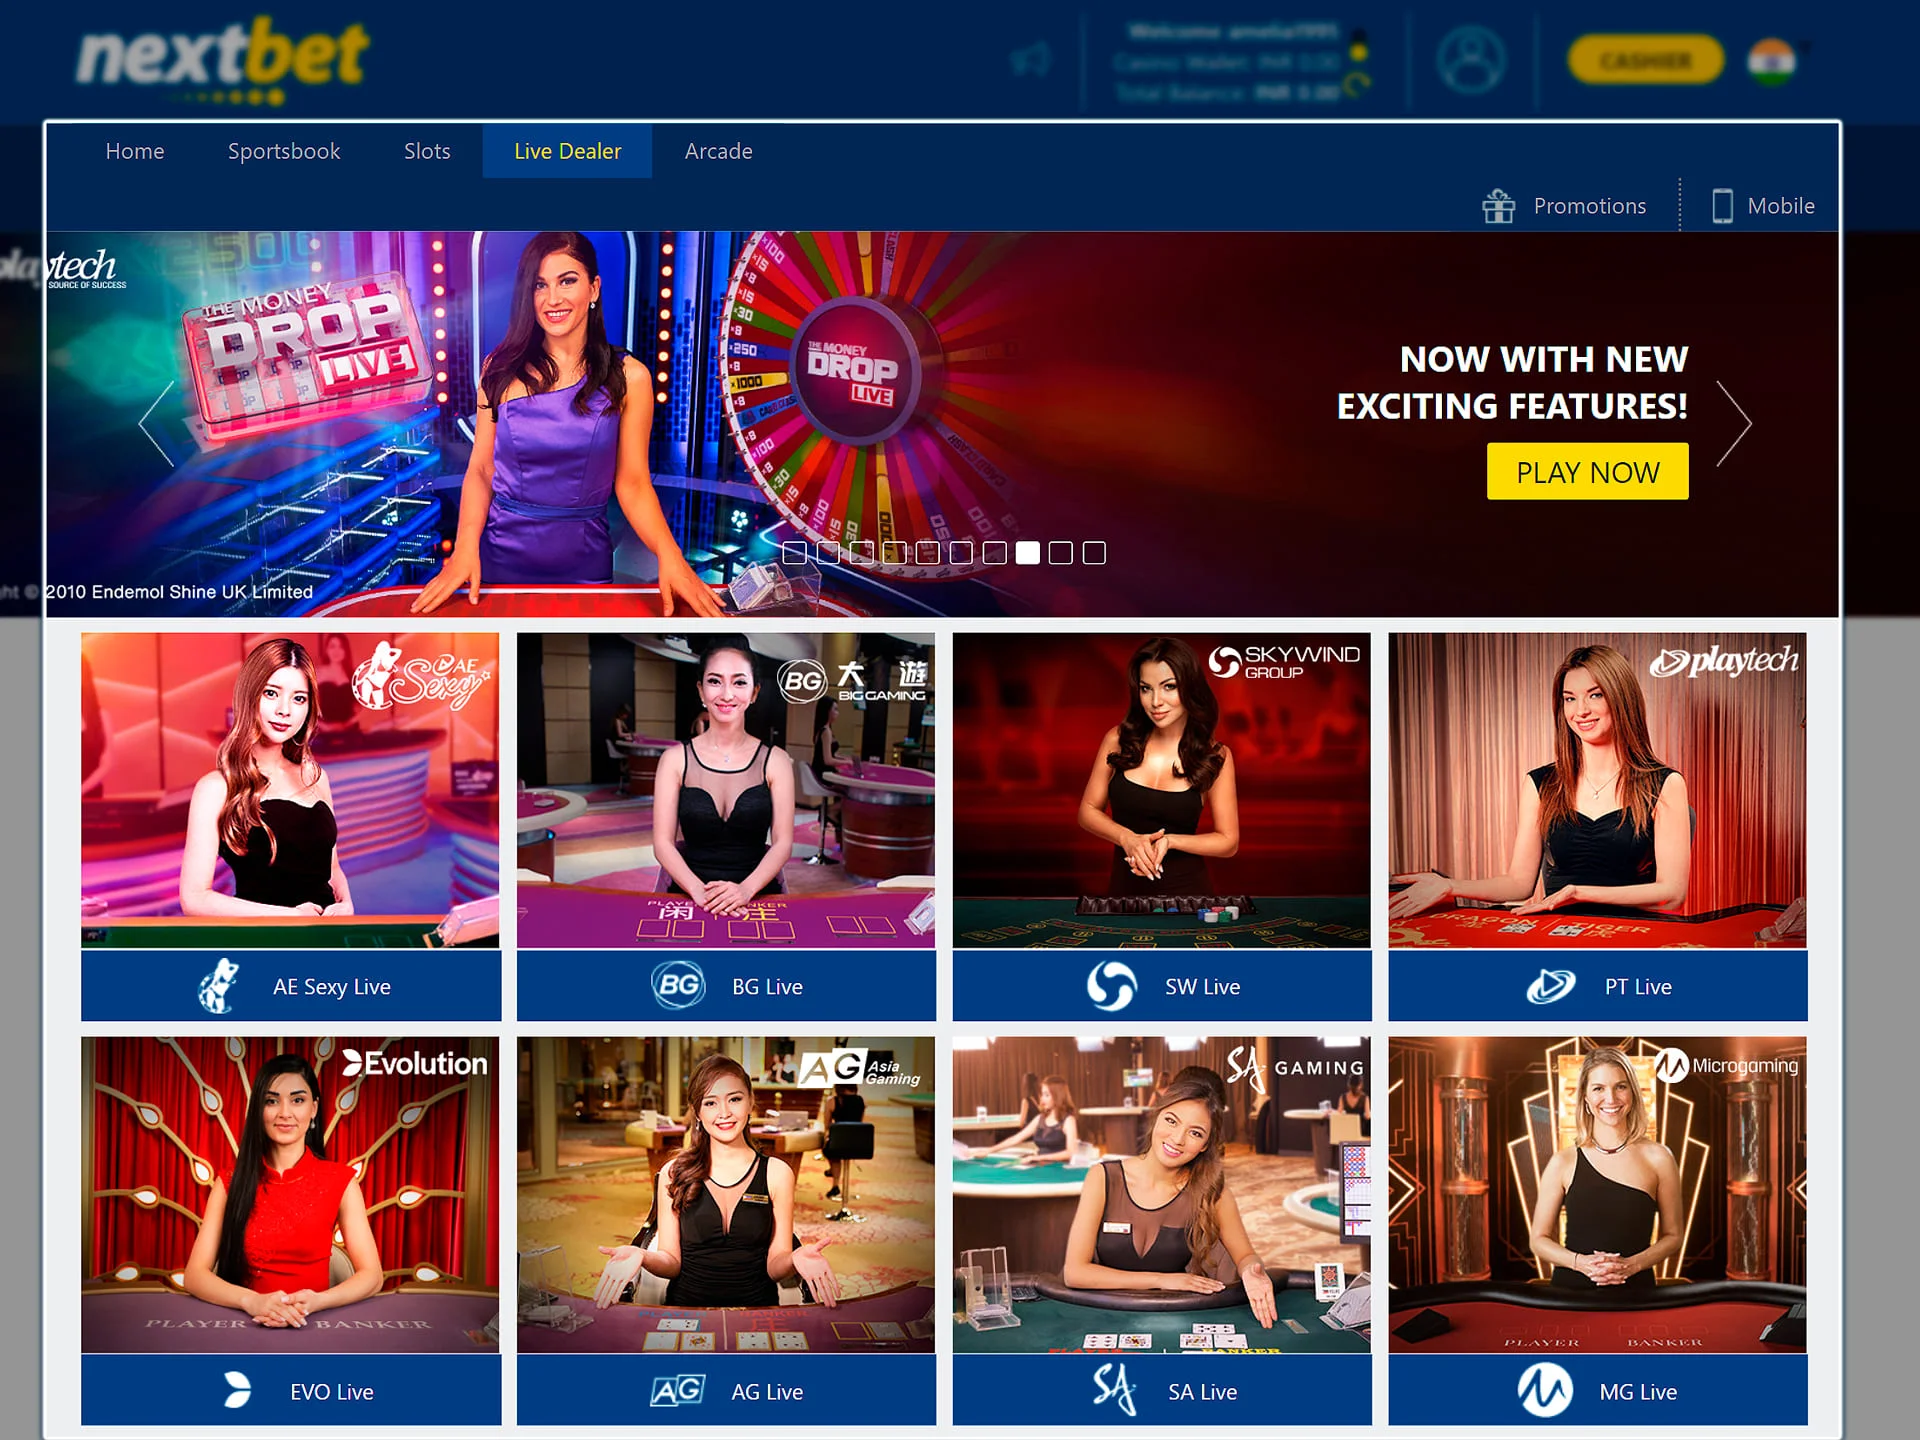 Head over to the Nextbet casino section and start playing.